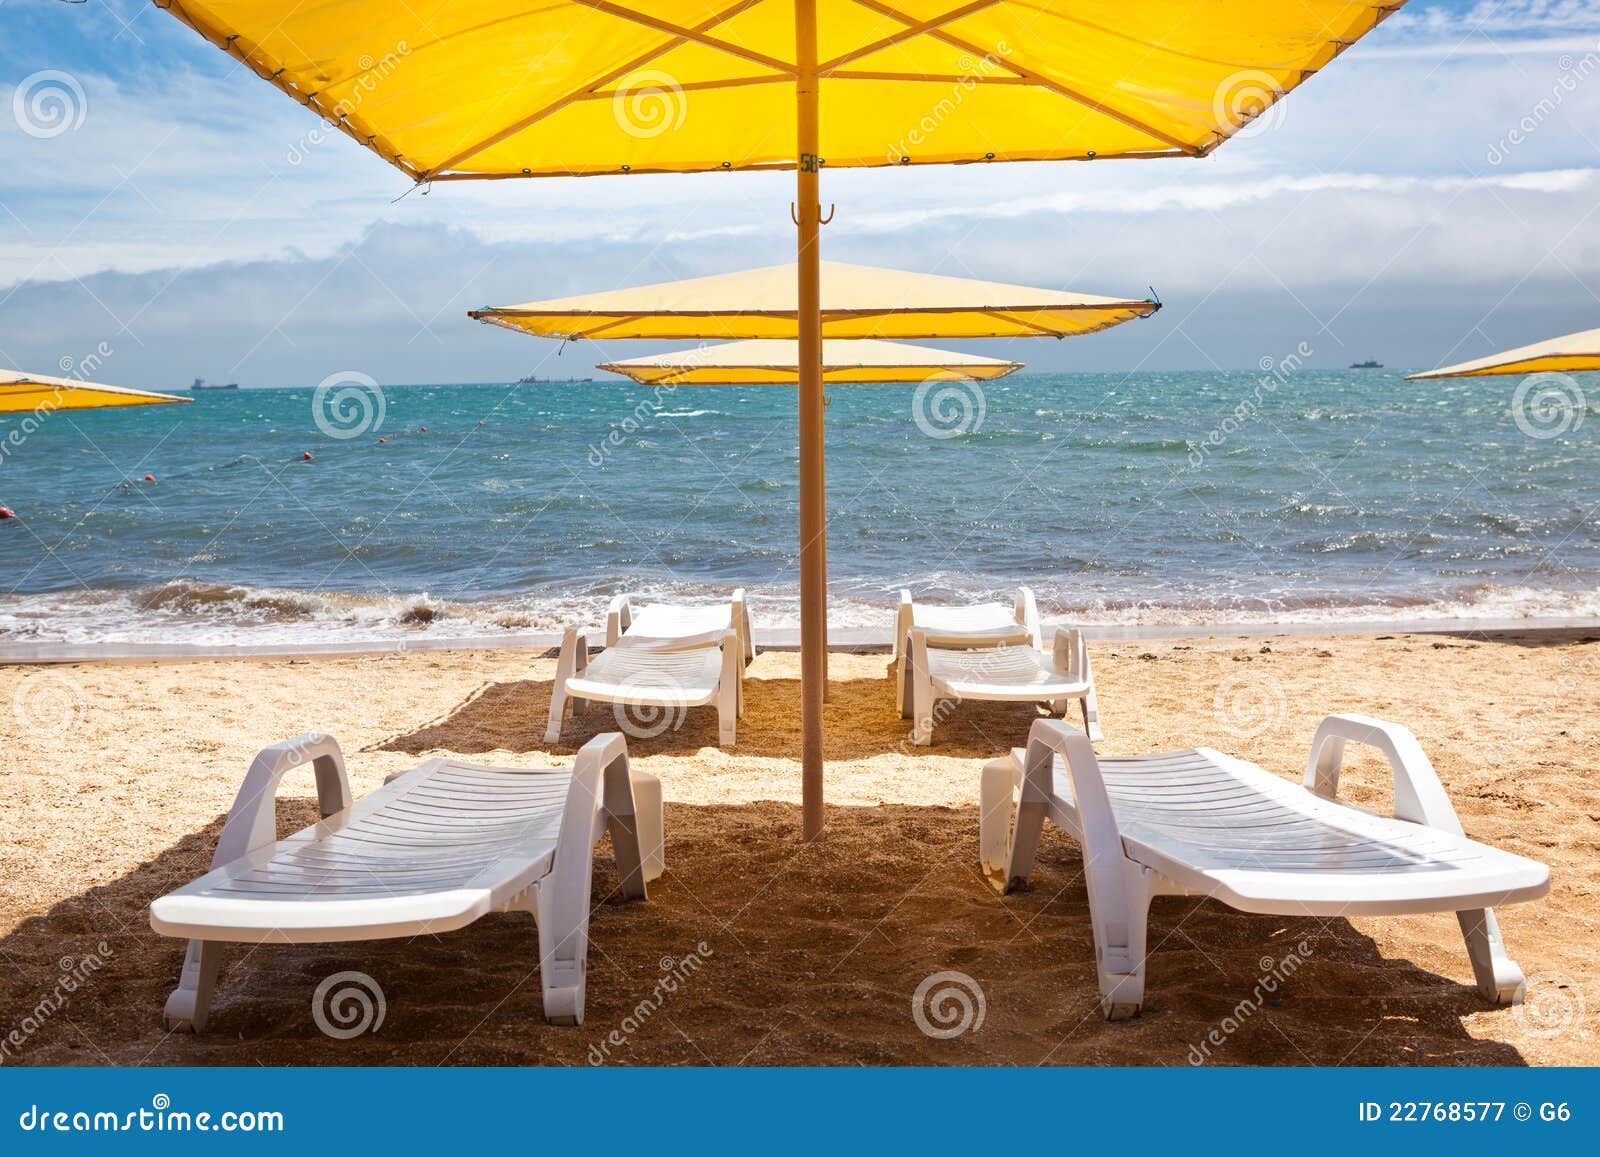 Chaise longue on the beach stock image. Image of relax - 22768577